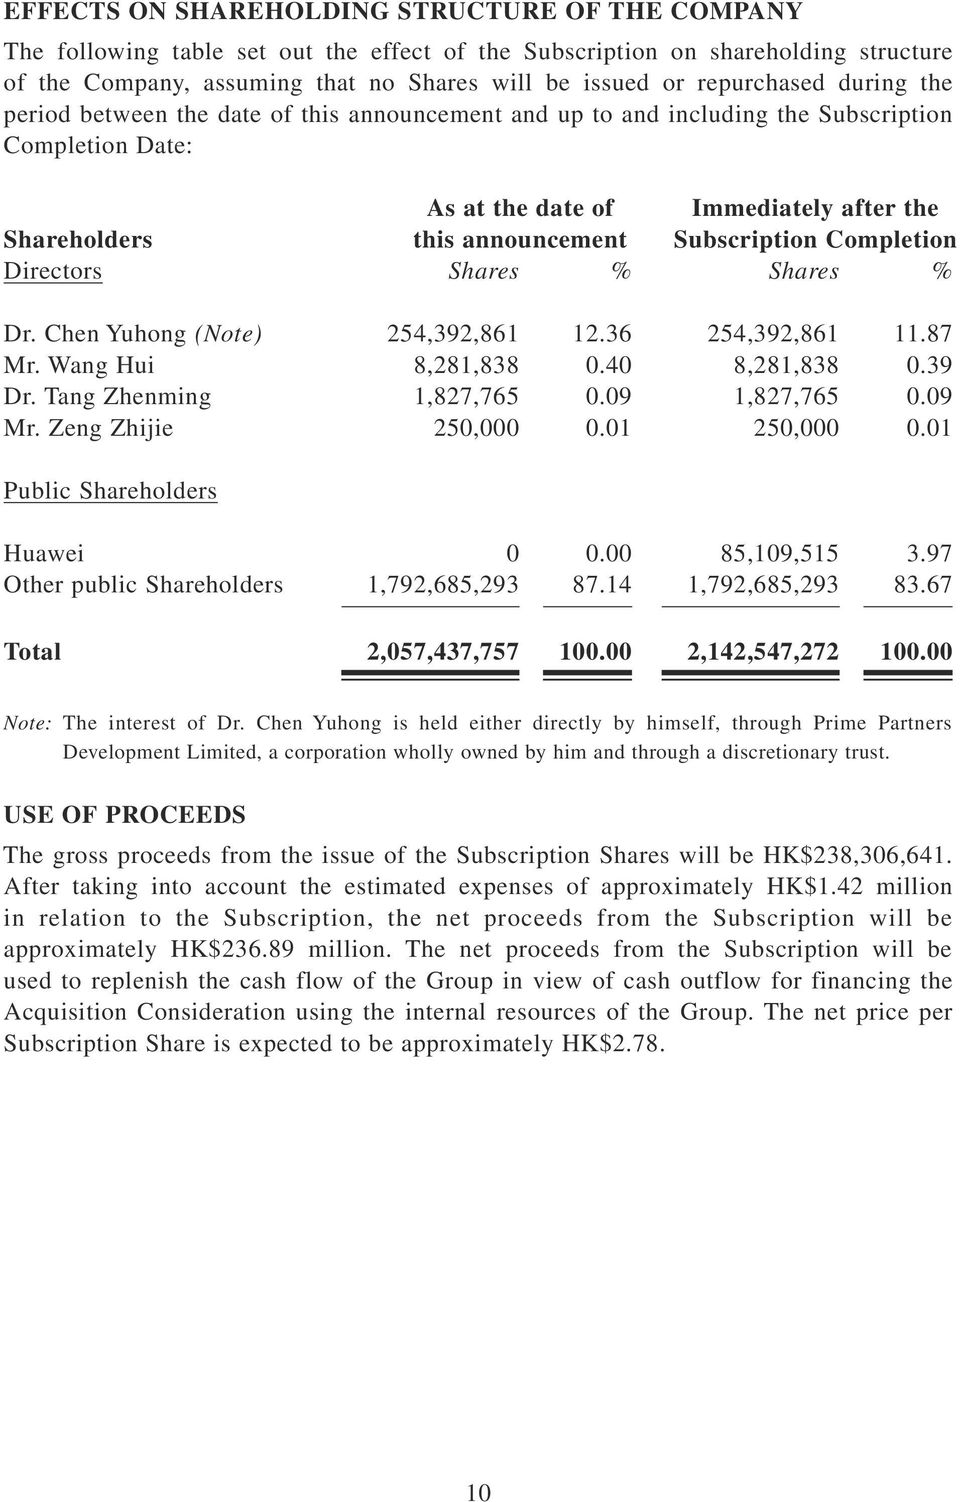 Subscription Completion Directors Shares % Shares % Dr. Chen Yuhong (Note) 254,392,861 12.36 254,392,861 11.87 Mr. Wang Hui 8,281,838 0.40 8,281,838 0.39 Dr. Tang Zhenming 1,827,765 0.09 1,827,765 0.